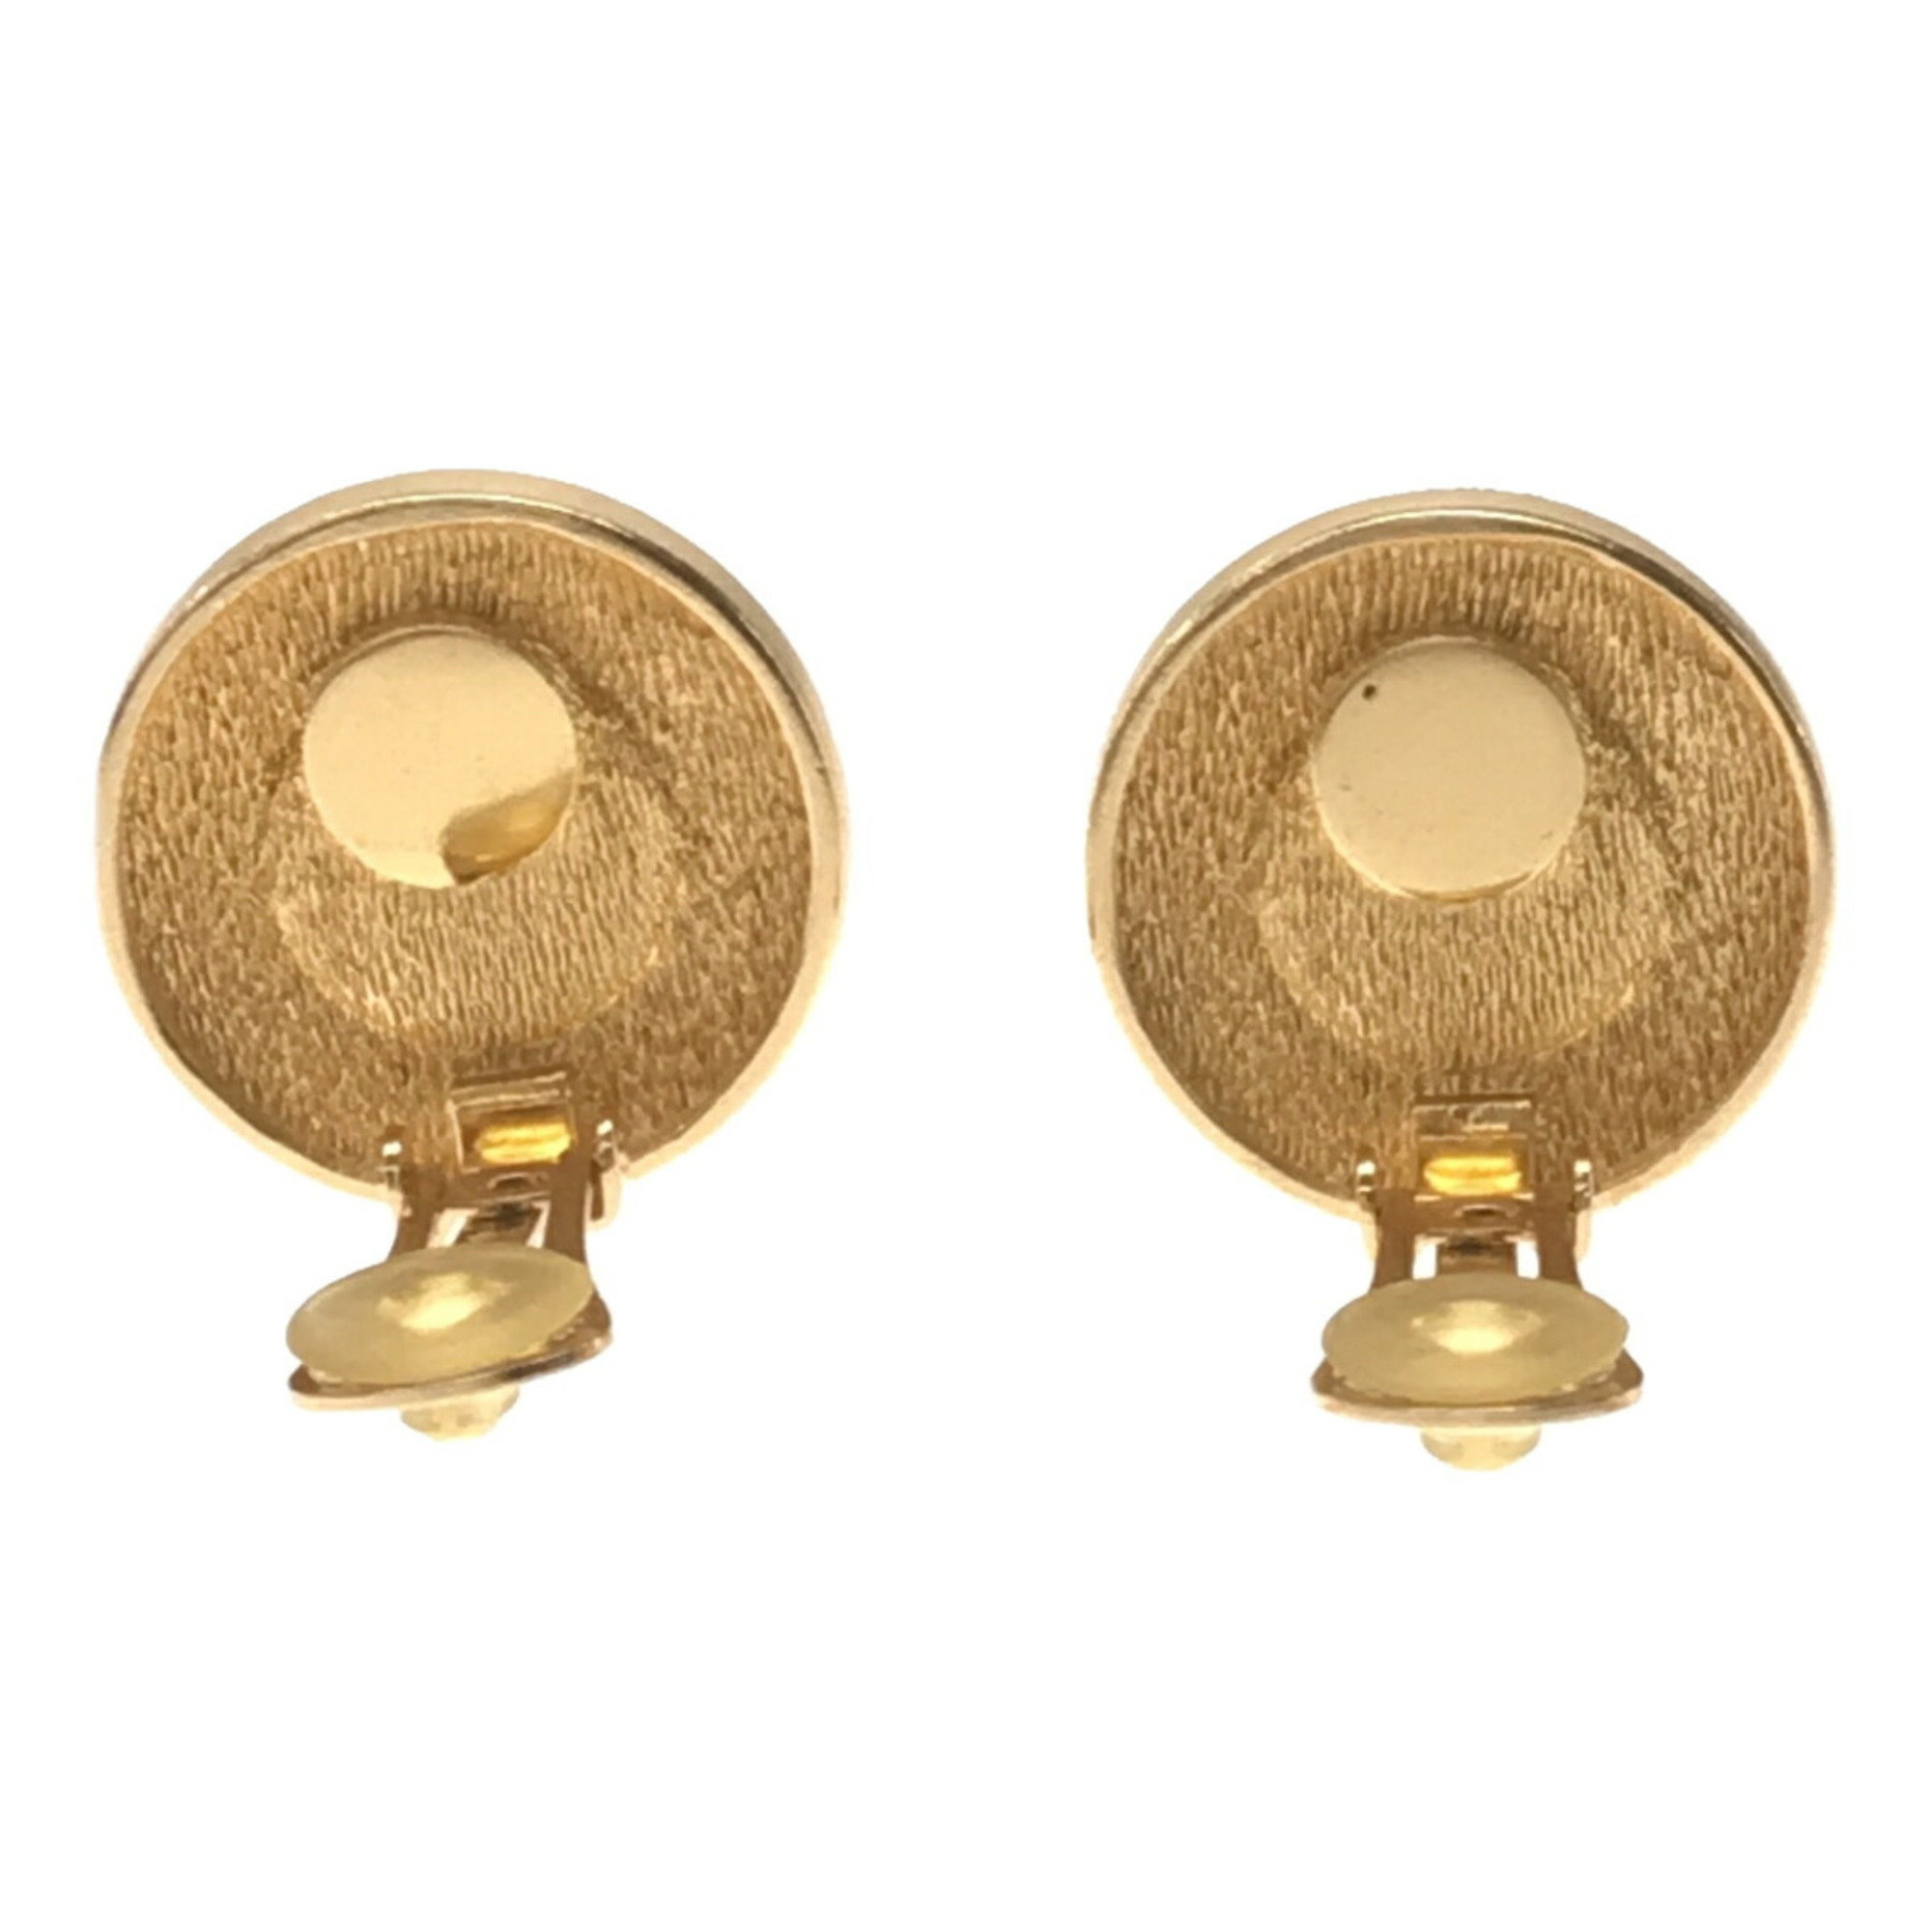 Christian Dior Big Earrings Round Flower Motif Accessories Women's Gold VINTAGE OLD ITDJ6RPU0AIE RM2875M